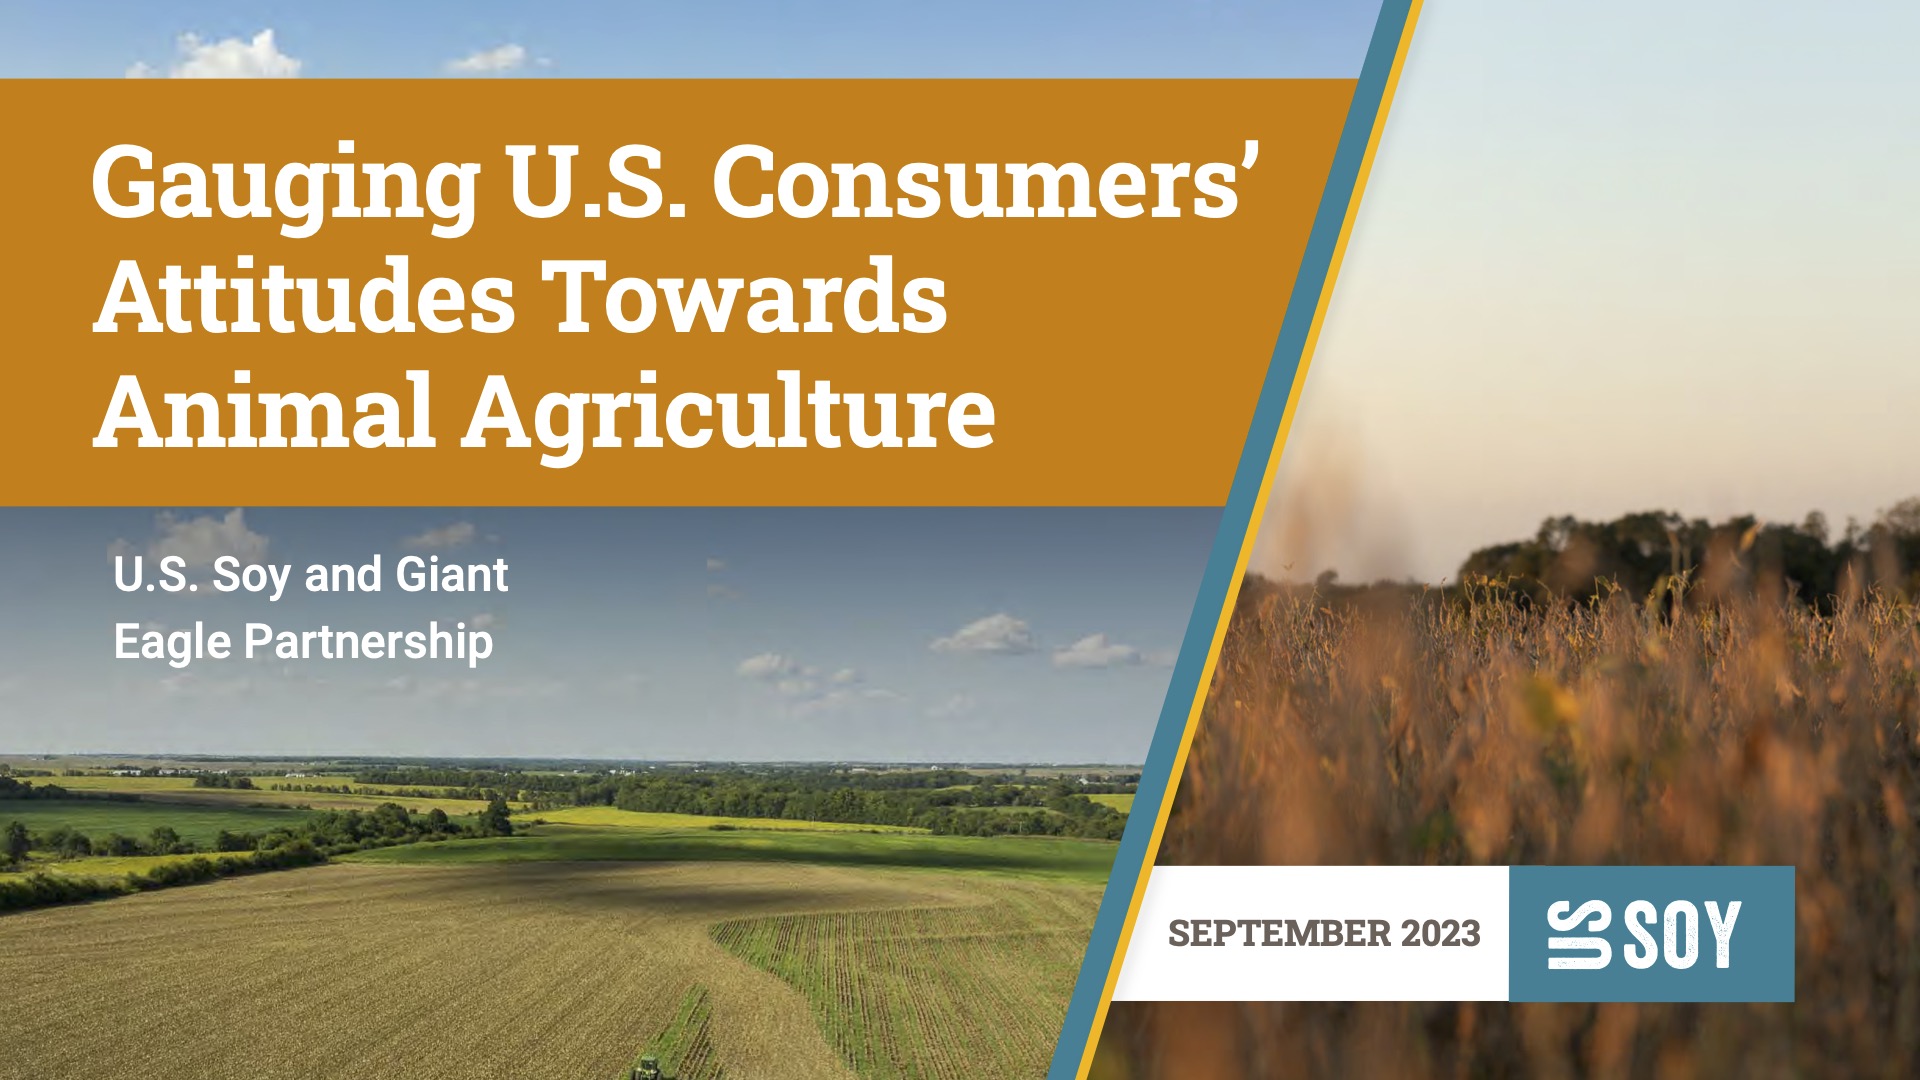 Gauging U.S. Consumers’ Attitudes Toward Animal Agriculture: U.S. Soy and Giant Eagle Partnership